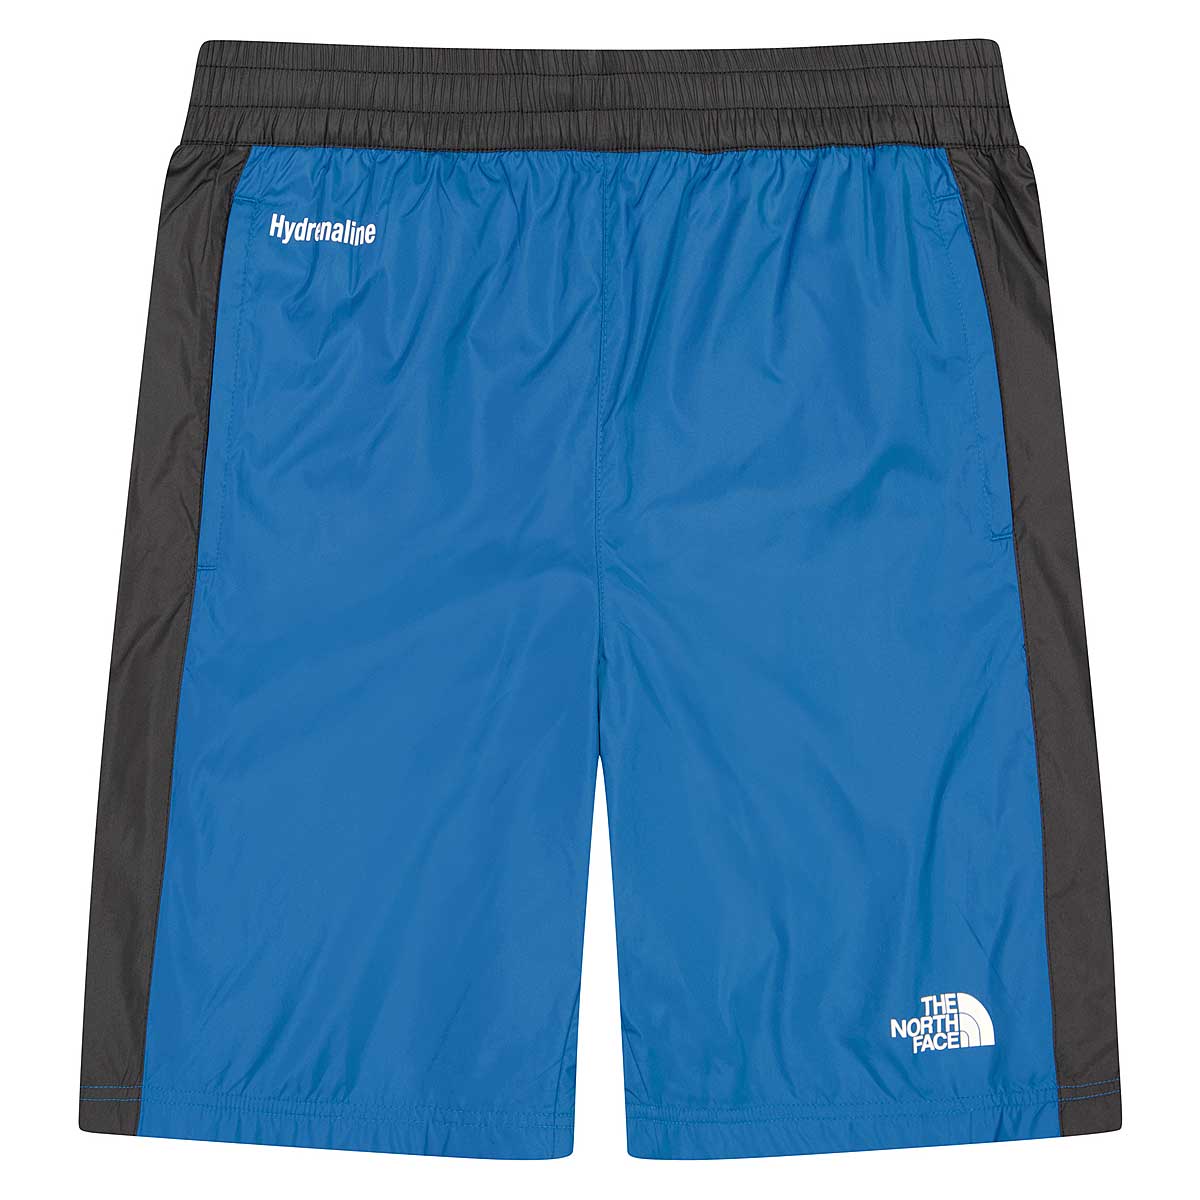 The North Face Hydrenaline Short 2000, Banff Blue